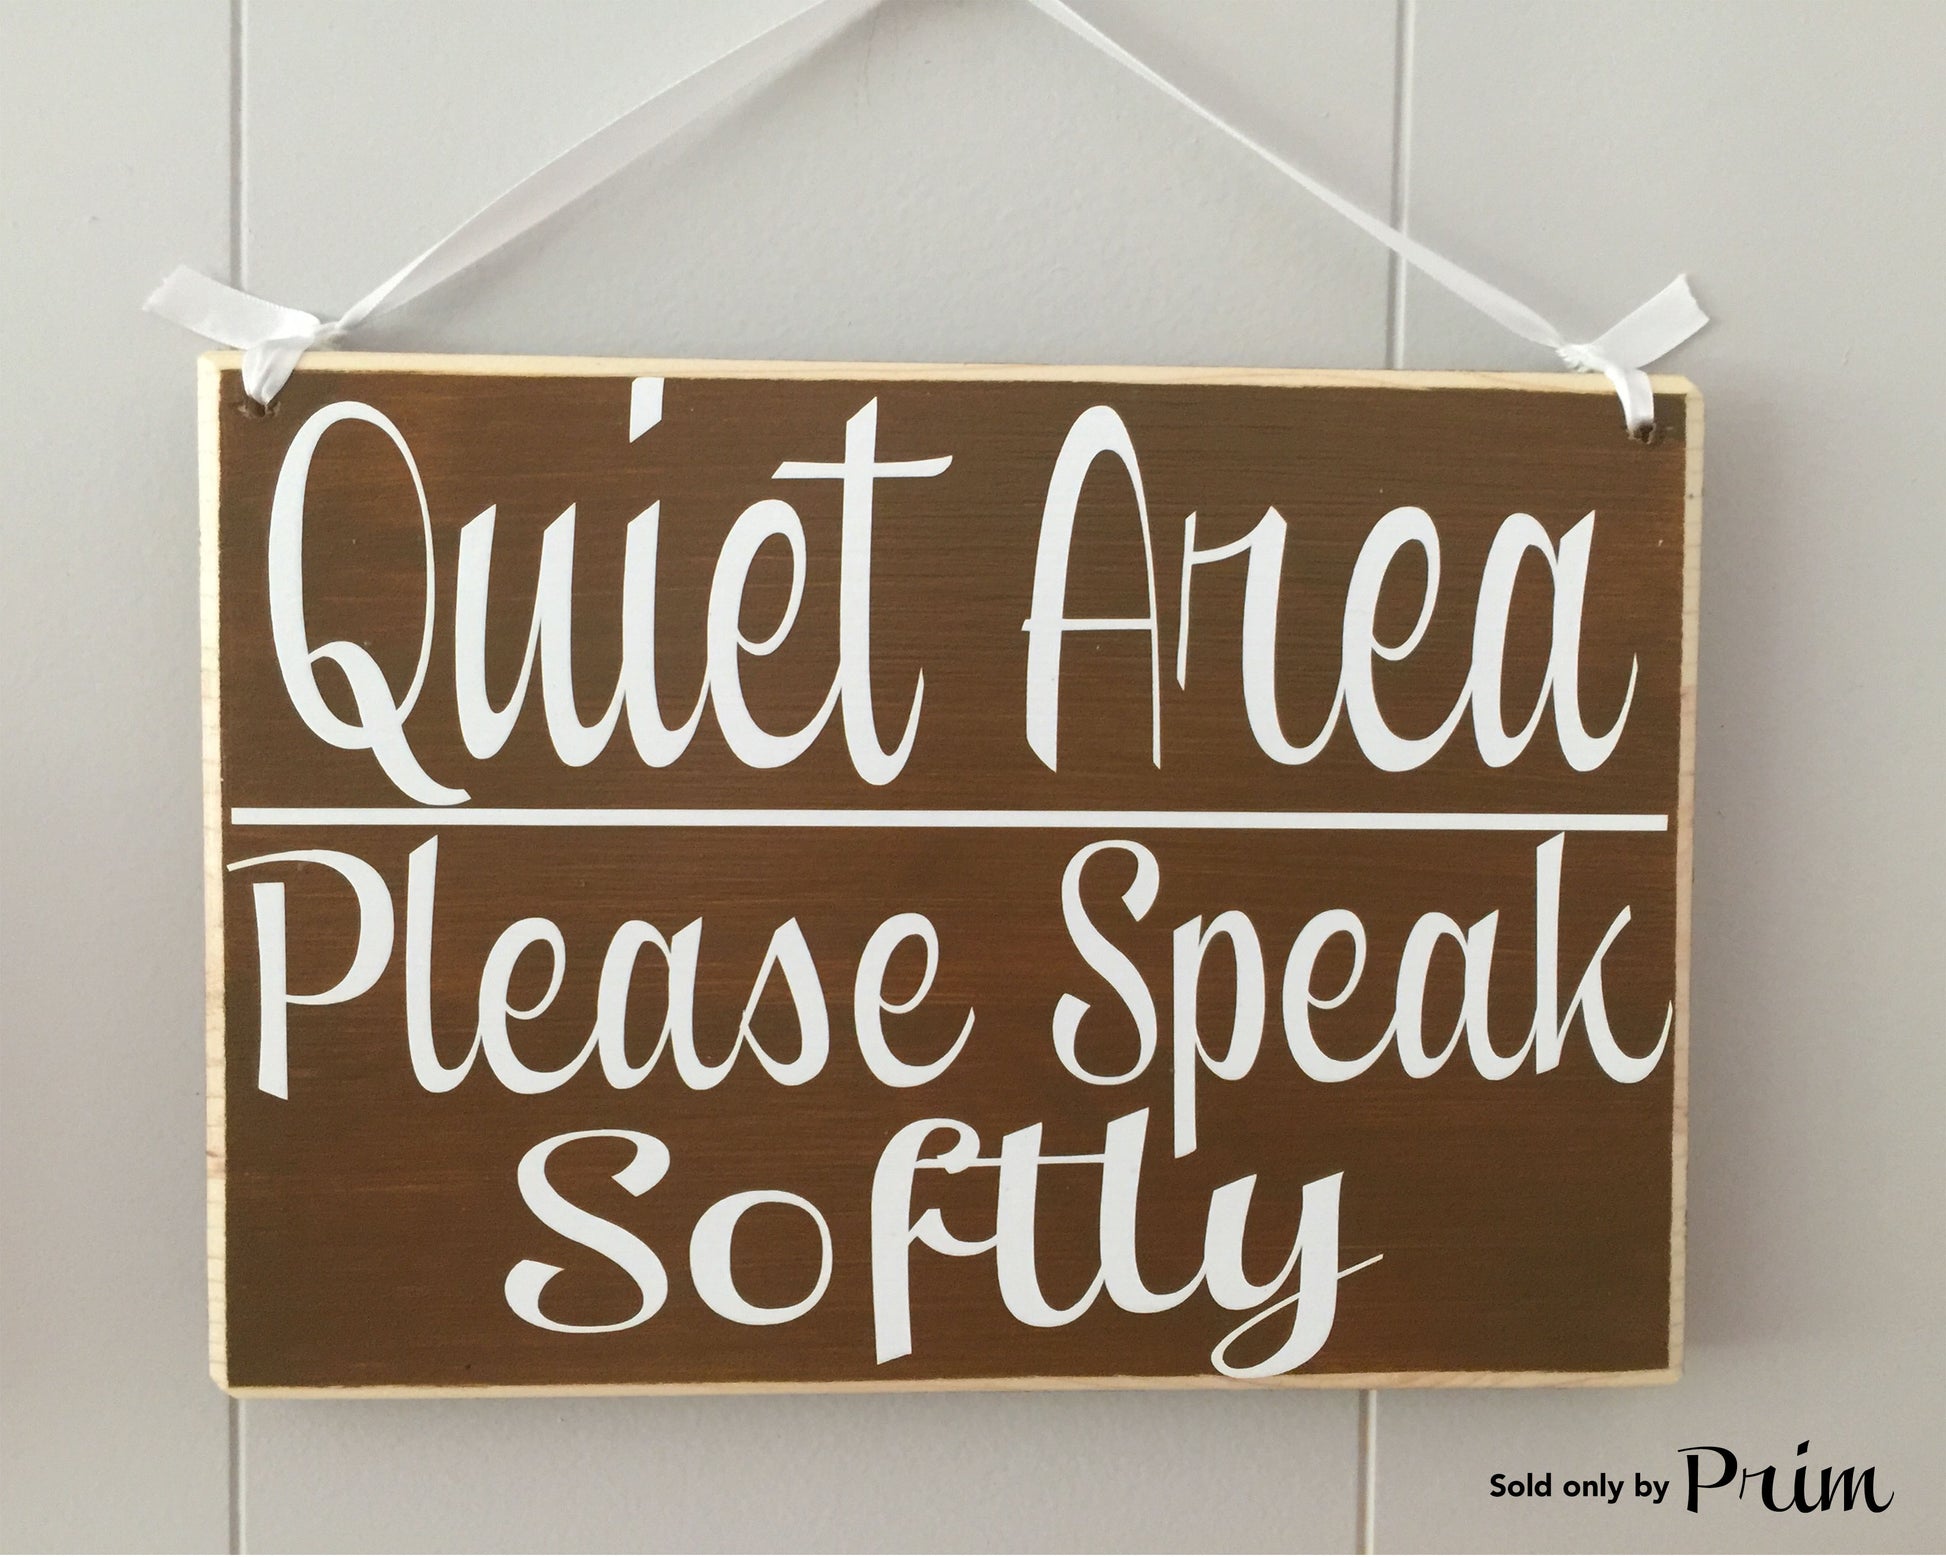 10x8 Quiet Area Please Speak Softly Wood Shhh Soft Voices Sign